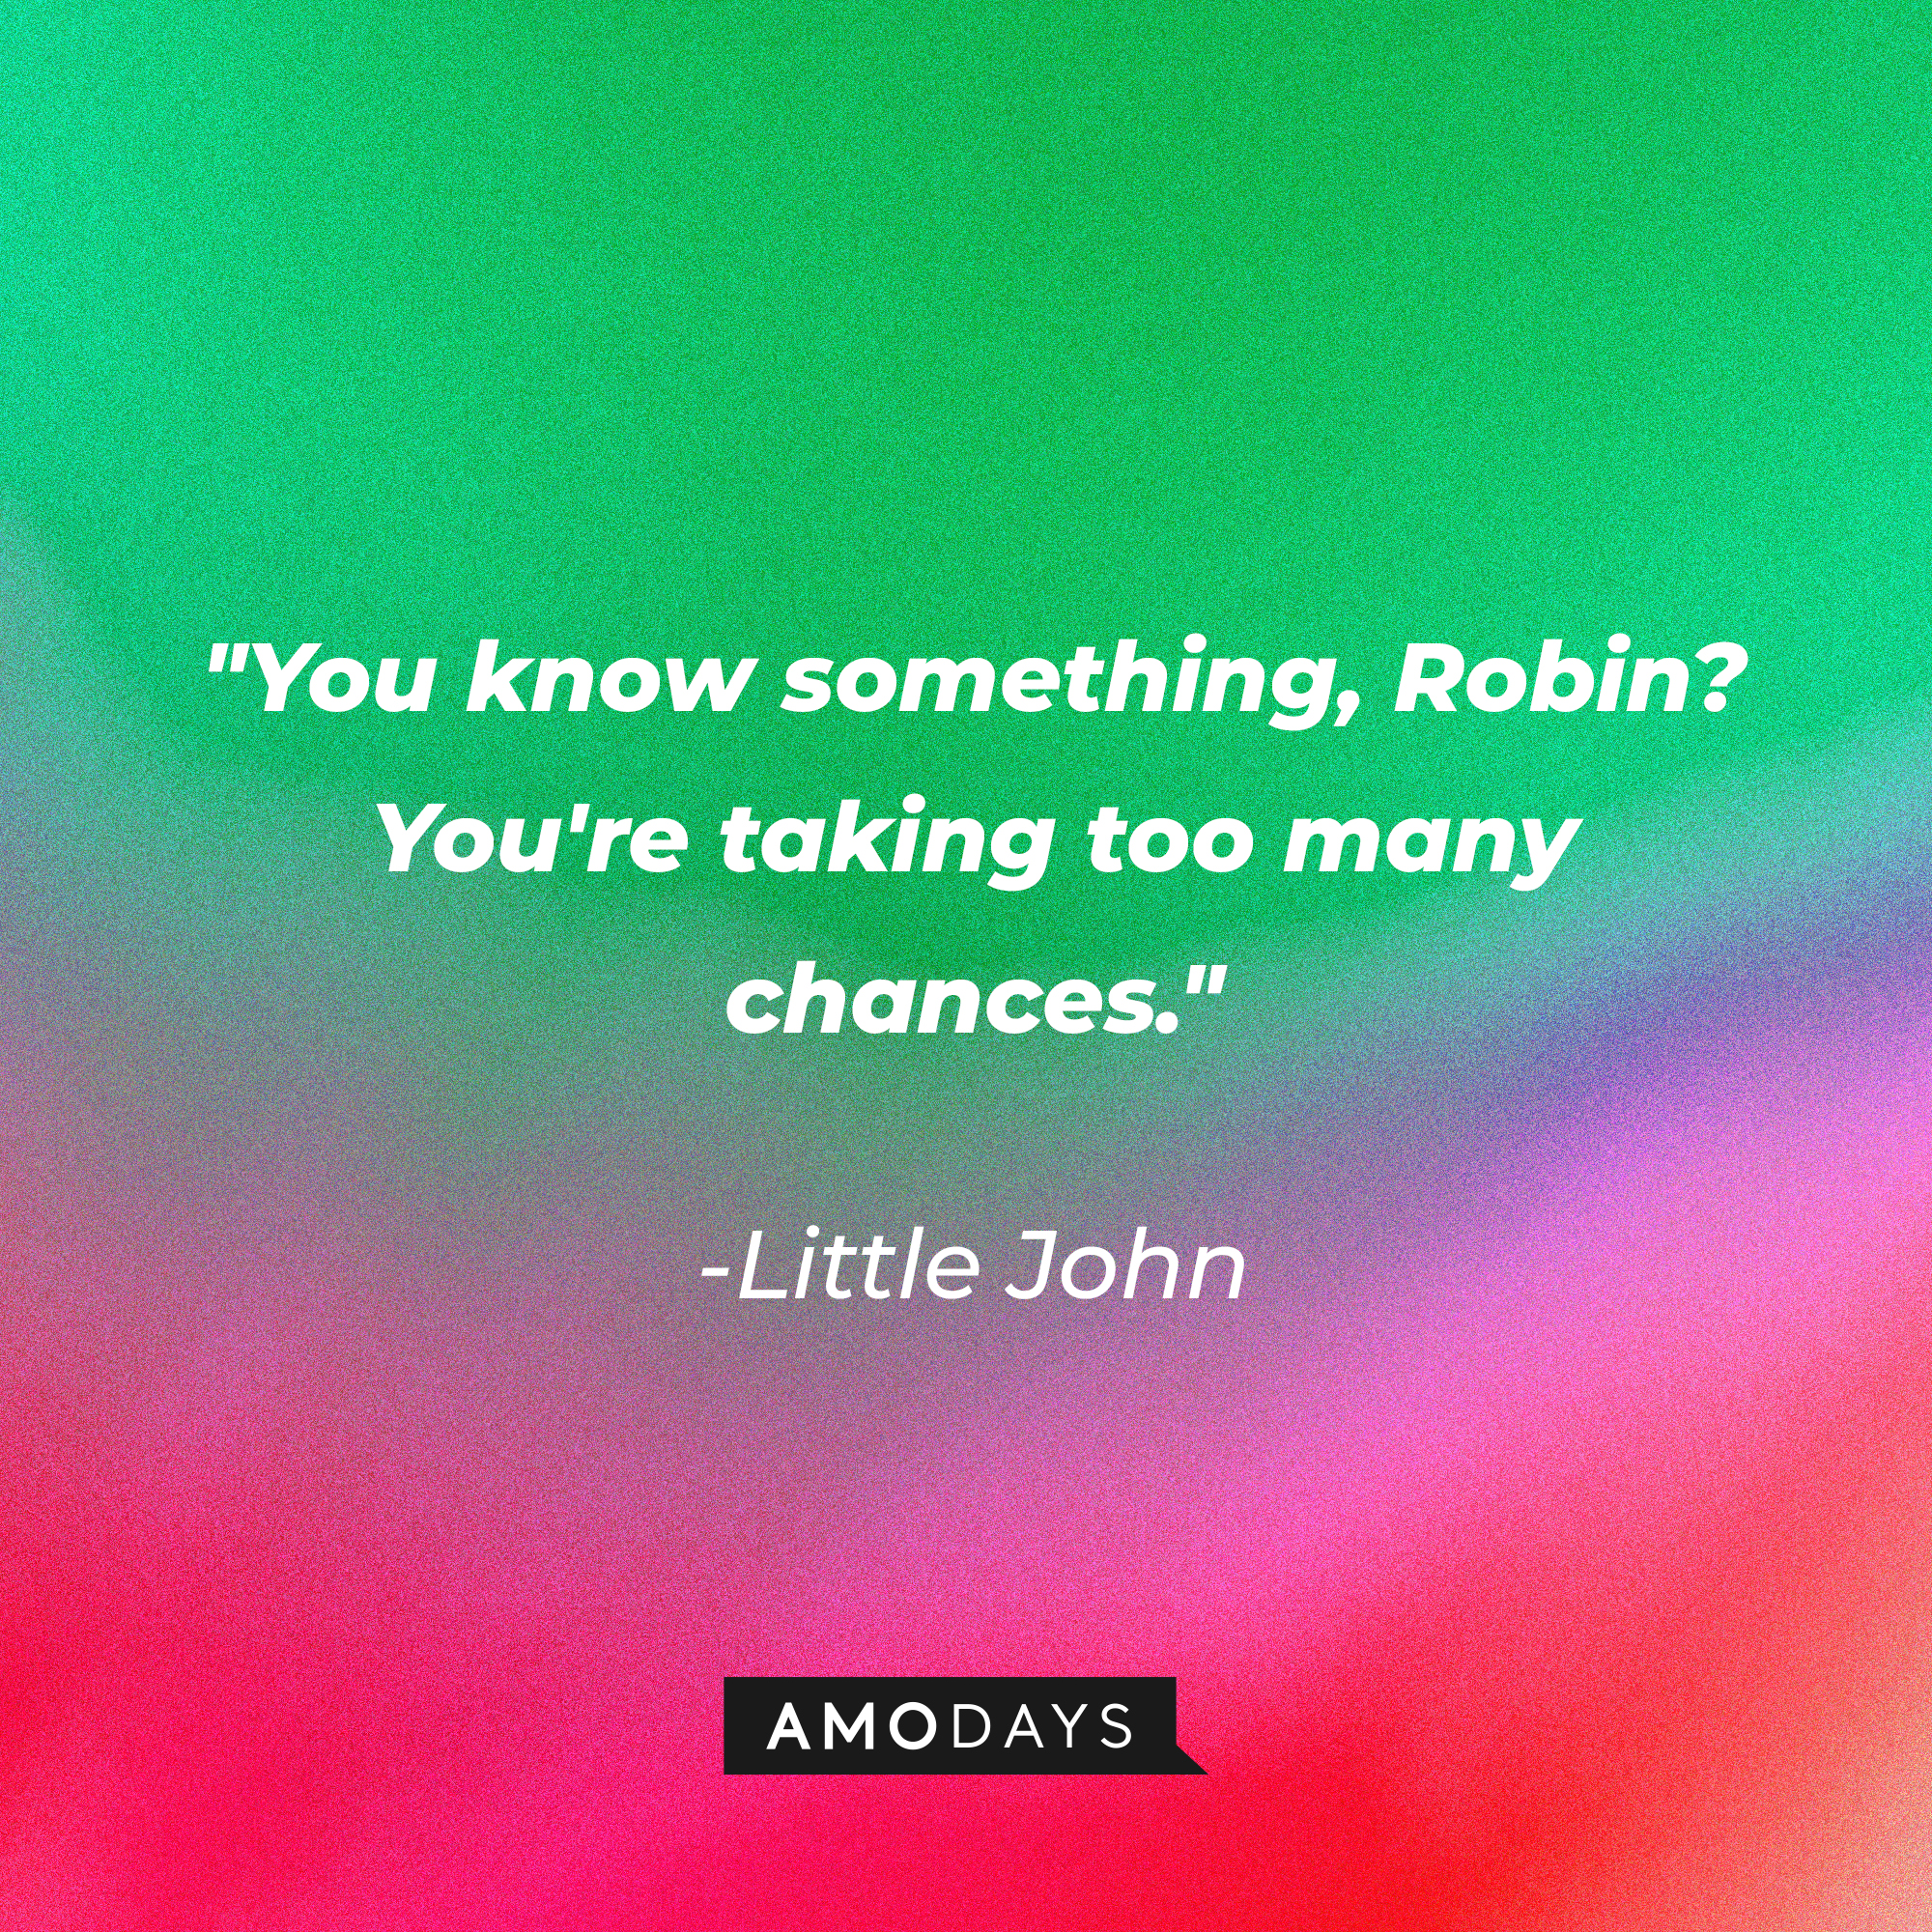 Little John's quote: "You know something, Robin? You're taking too many chances." | Source: Amodays